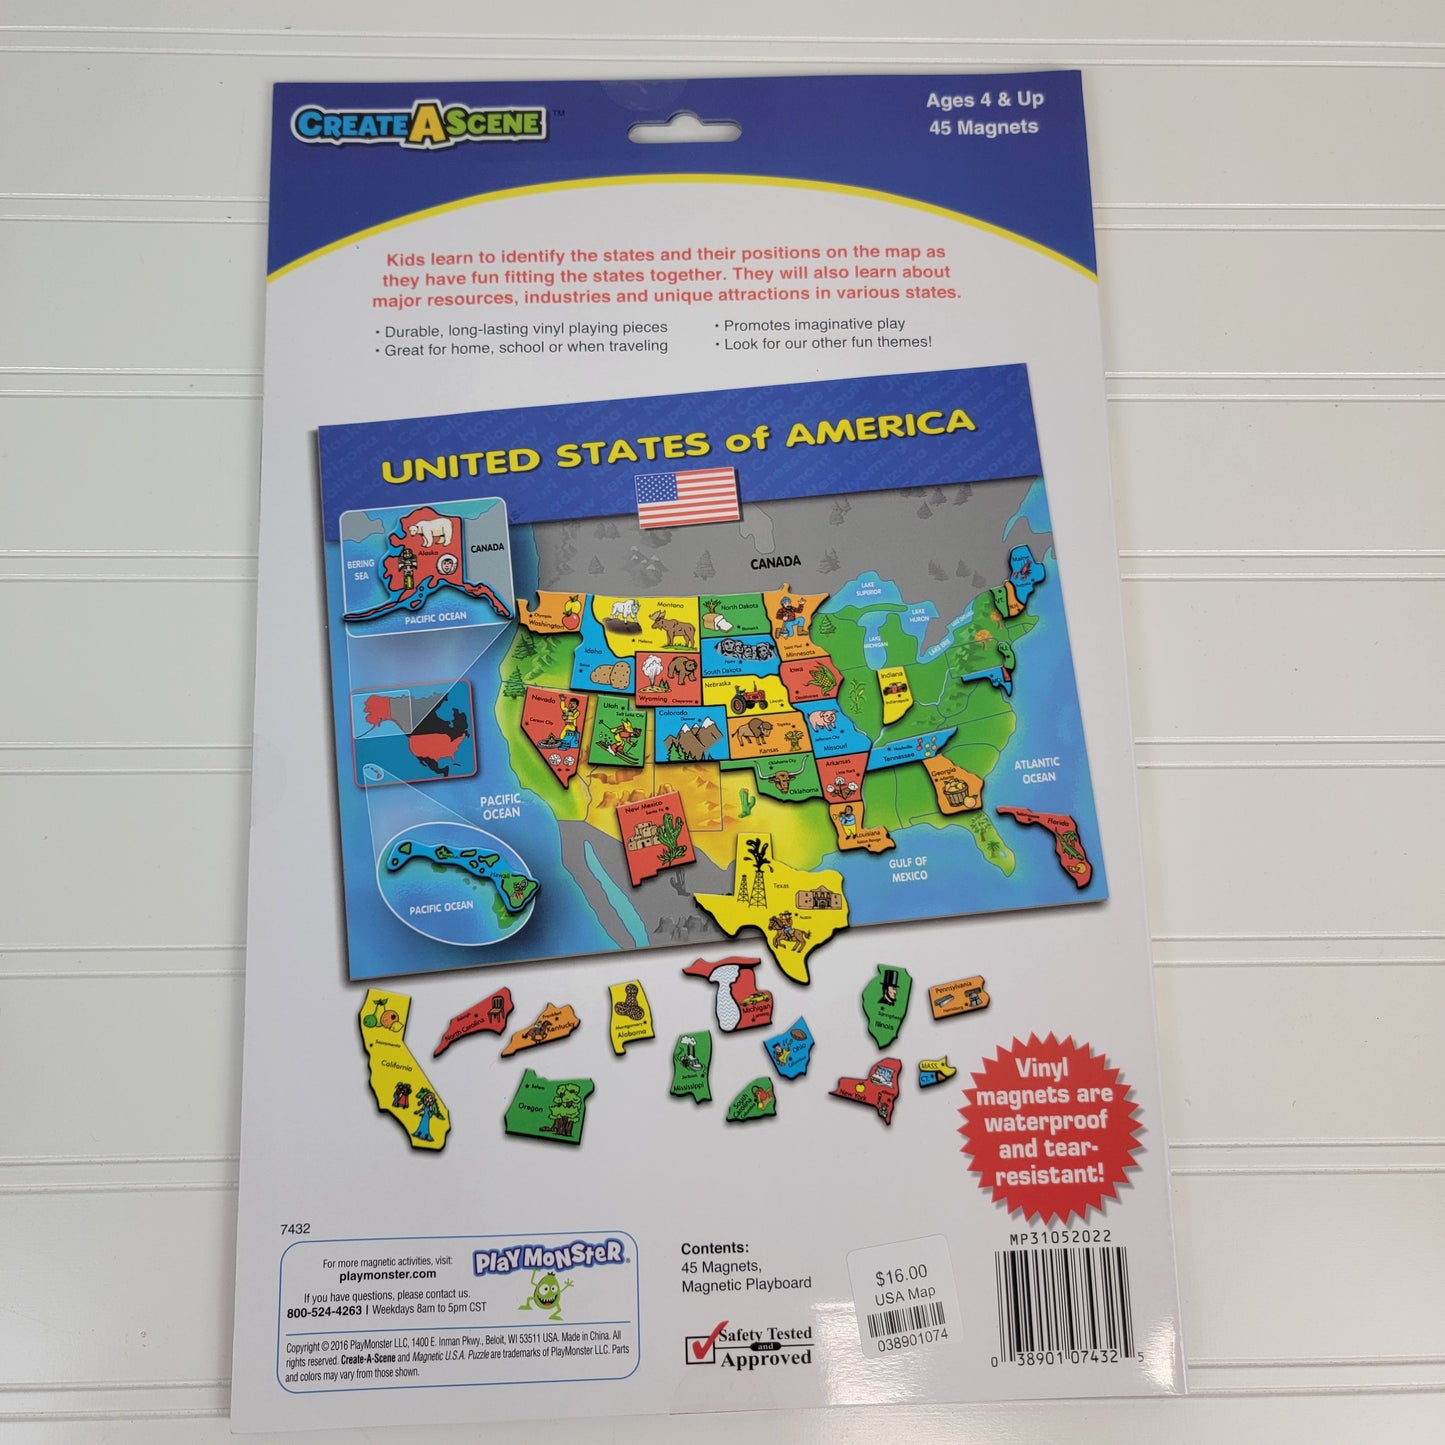 Create-A-Scene Magnetic Play Sets